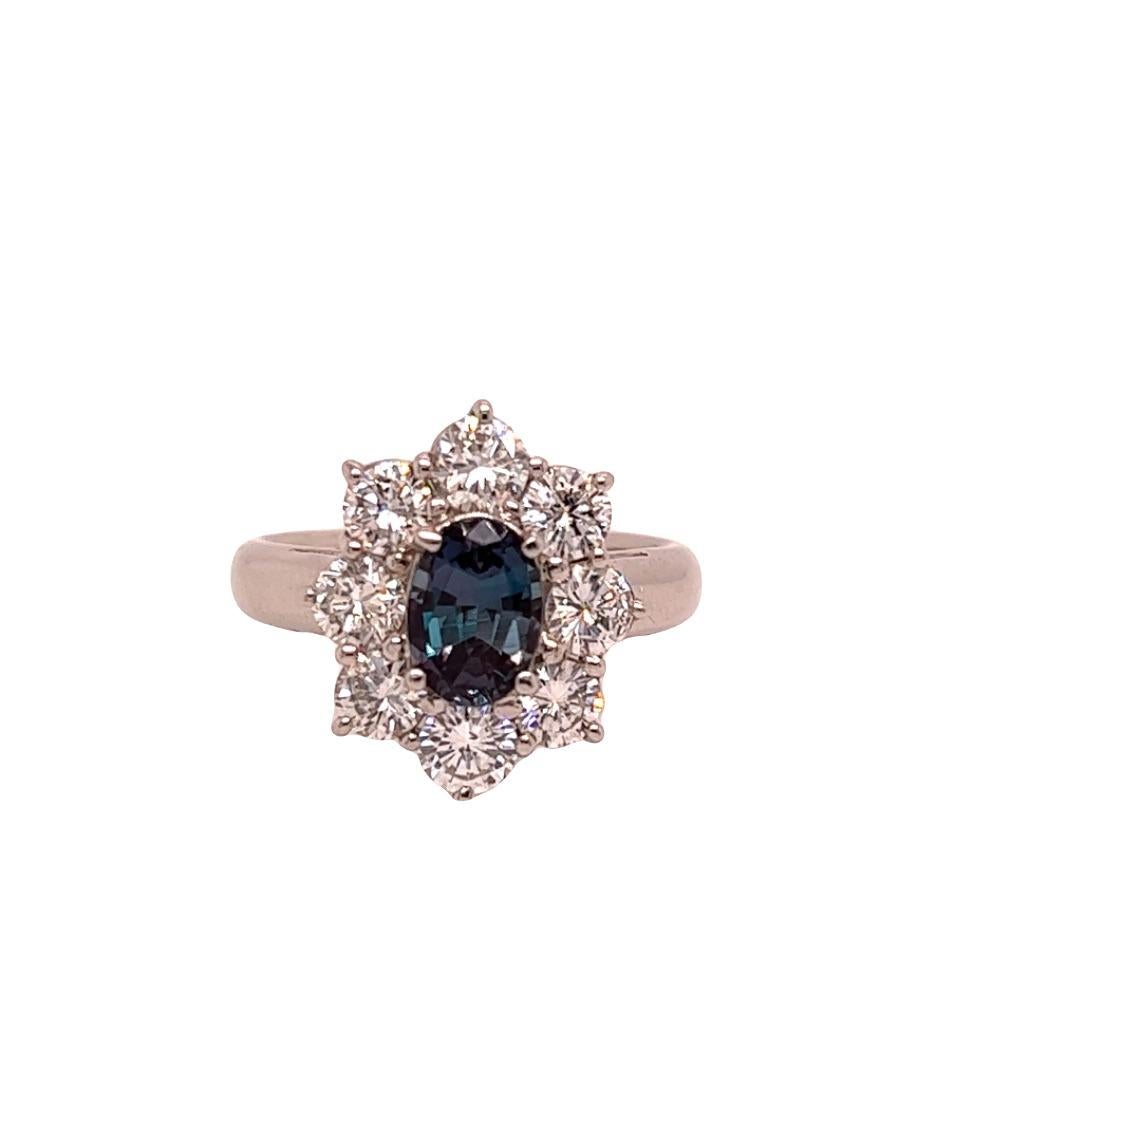 This is a gorgeous natural AAA quality oval Alexandrite surrounded by a dainty diamond halo that is set in a vintage platinum setting. This ring features a natural 1.25 oval alexandrite that is certified by the Gemological Institute of America (GIA)